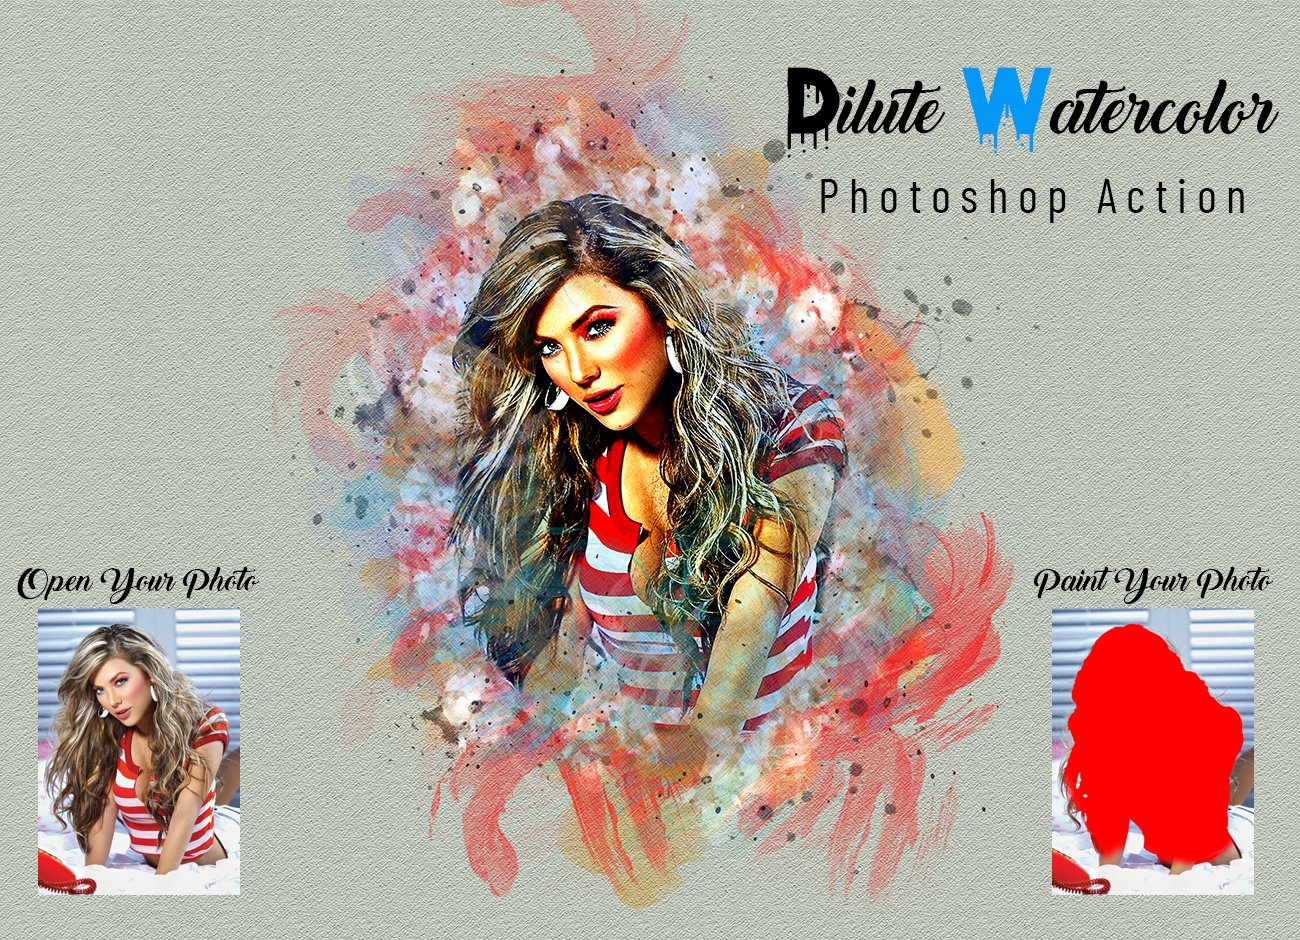 Dilute Watercolor Photoshop Actioncover image.